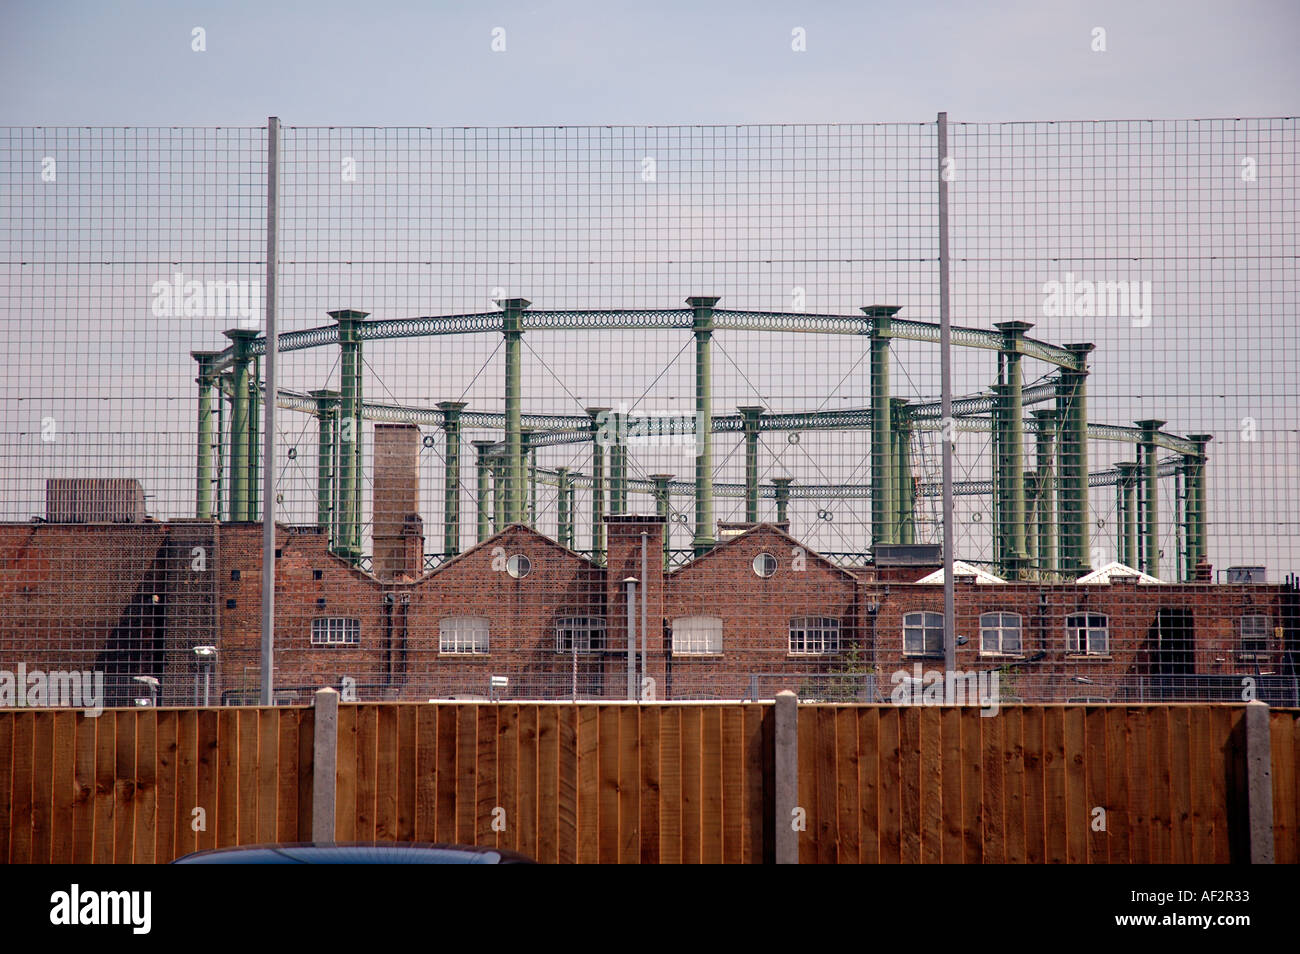 Domestic homes overlooked by gasometer by The Oval Kennington. Stock Photo